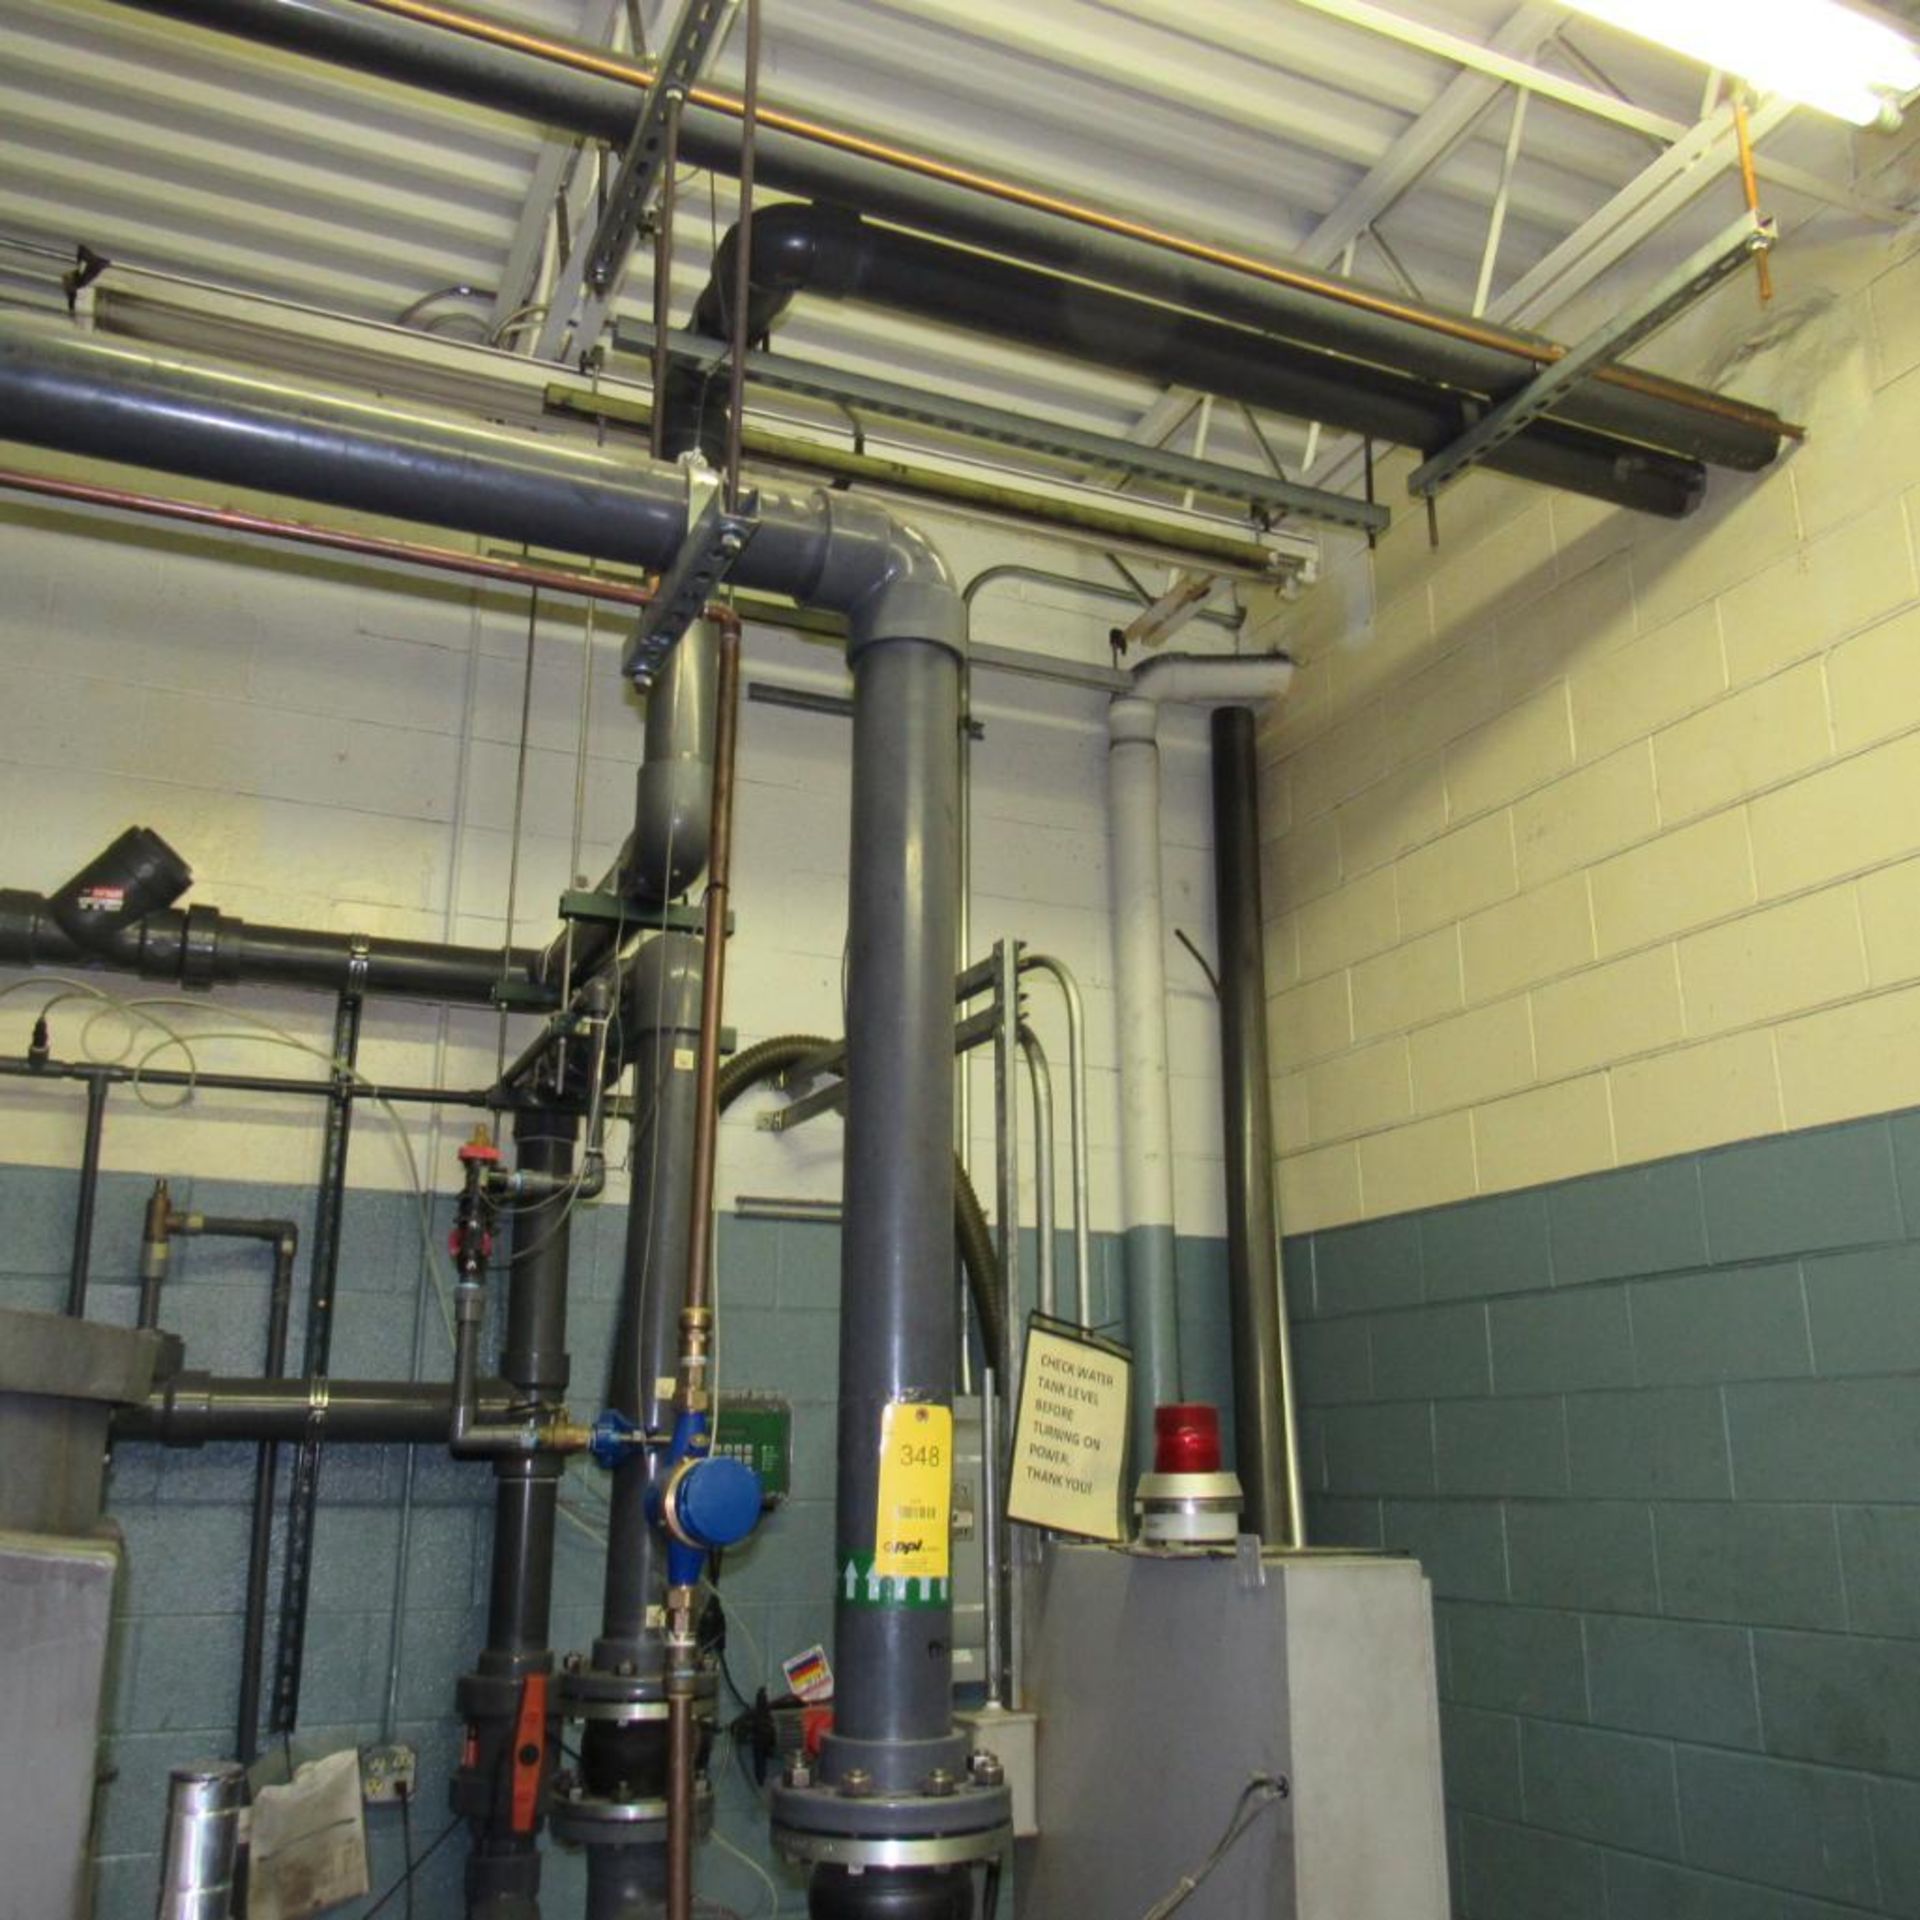 Advantage Chiller System, PTS Control, (3) Pumps, Roof Mounted Tank, TTK-850 (Location: Bldg. 1) - Image 9 of 11